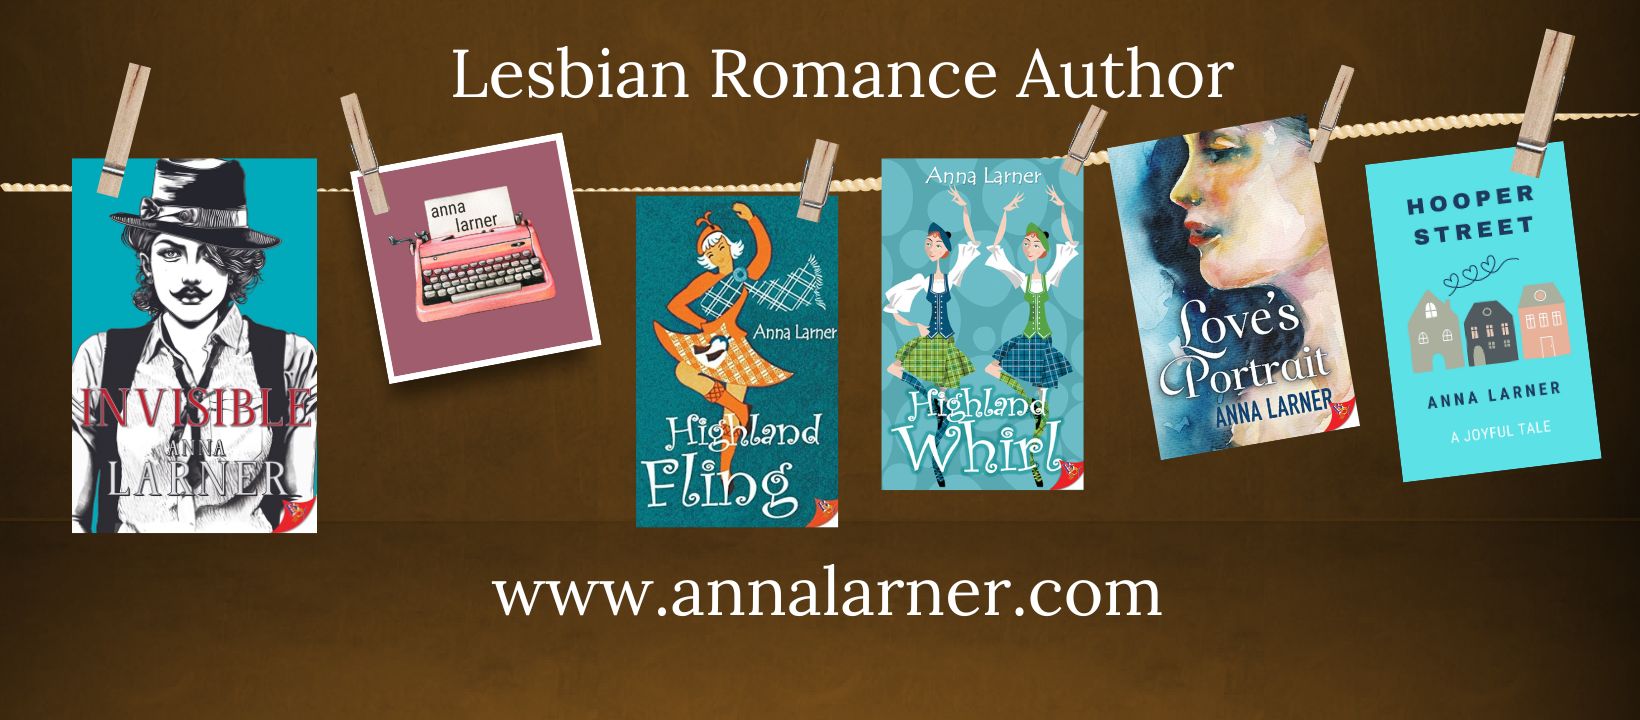 Books written by Lesbian Romance Author Anna Larner. Perfect balance of drama, angst and humour.